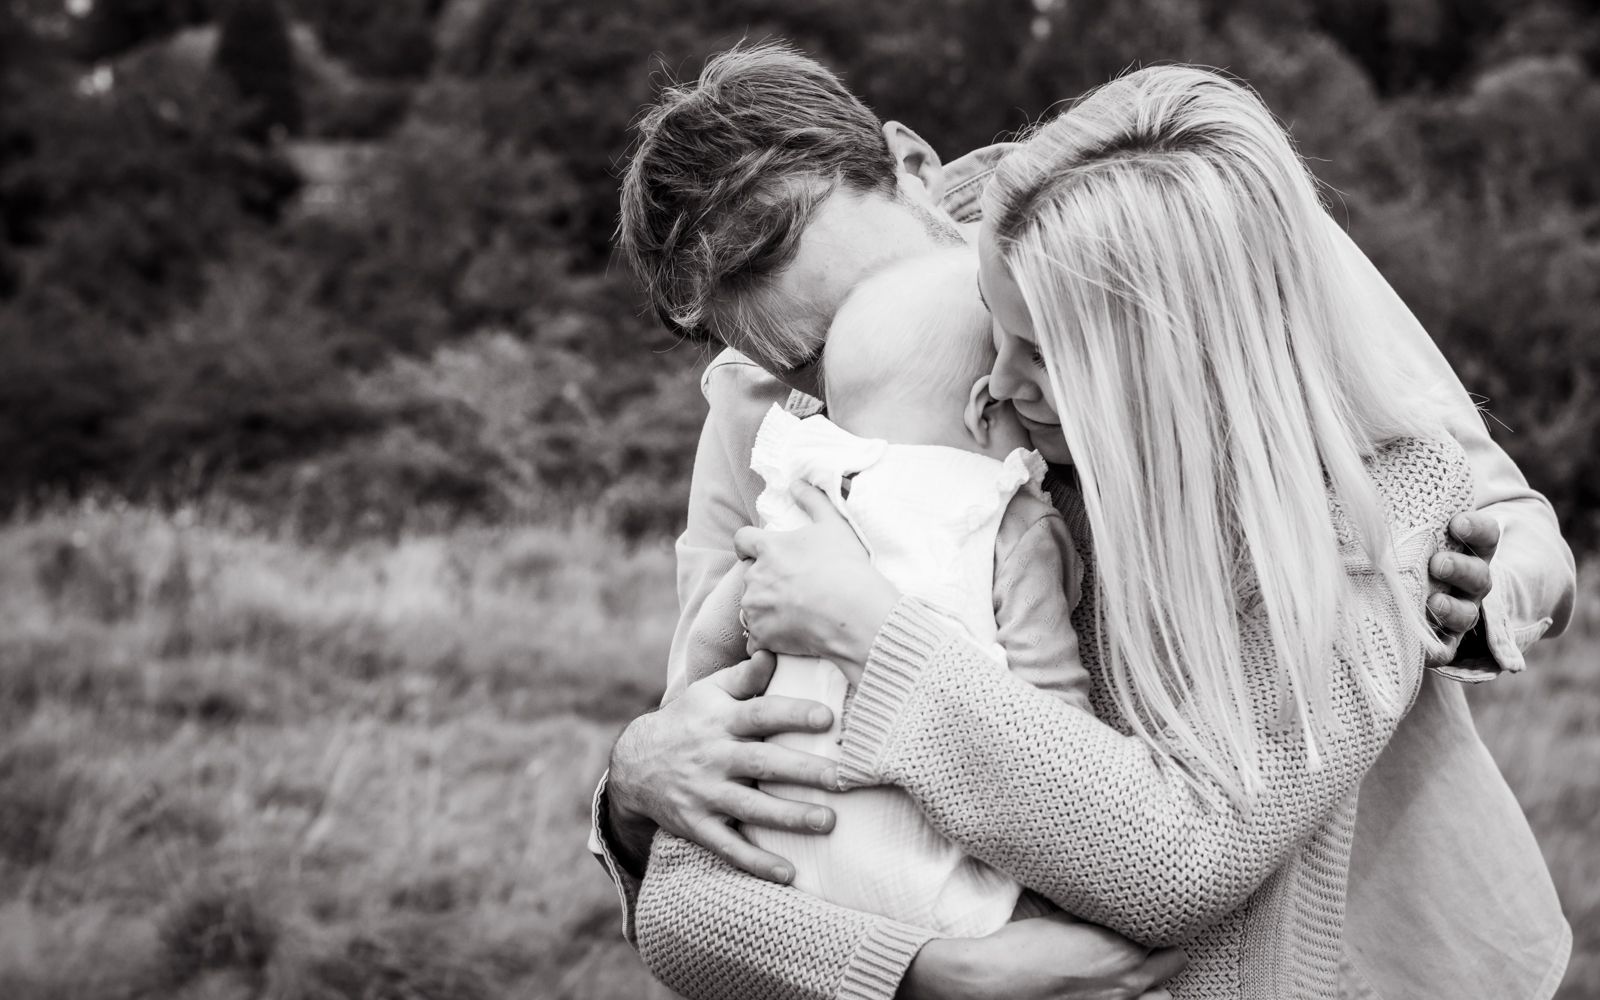 Mum and dad hug their little girl to comfort her during their baby photoshoot in the countryside